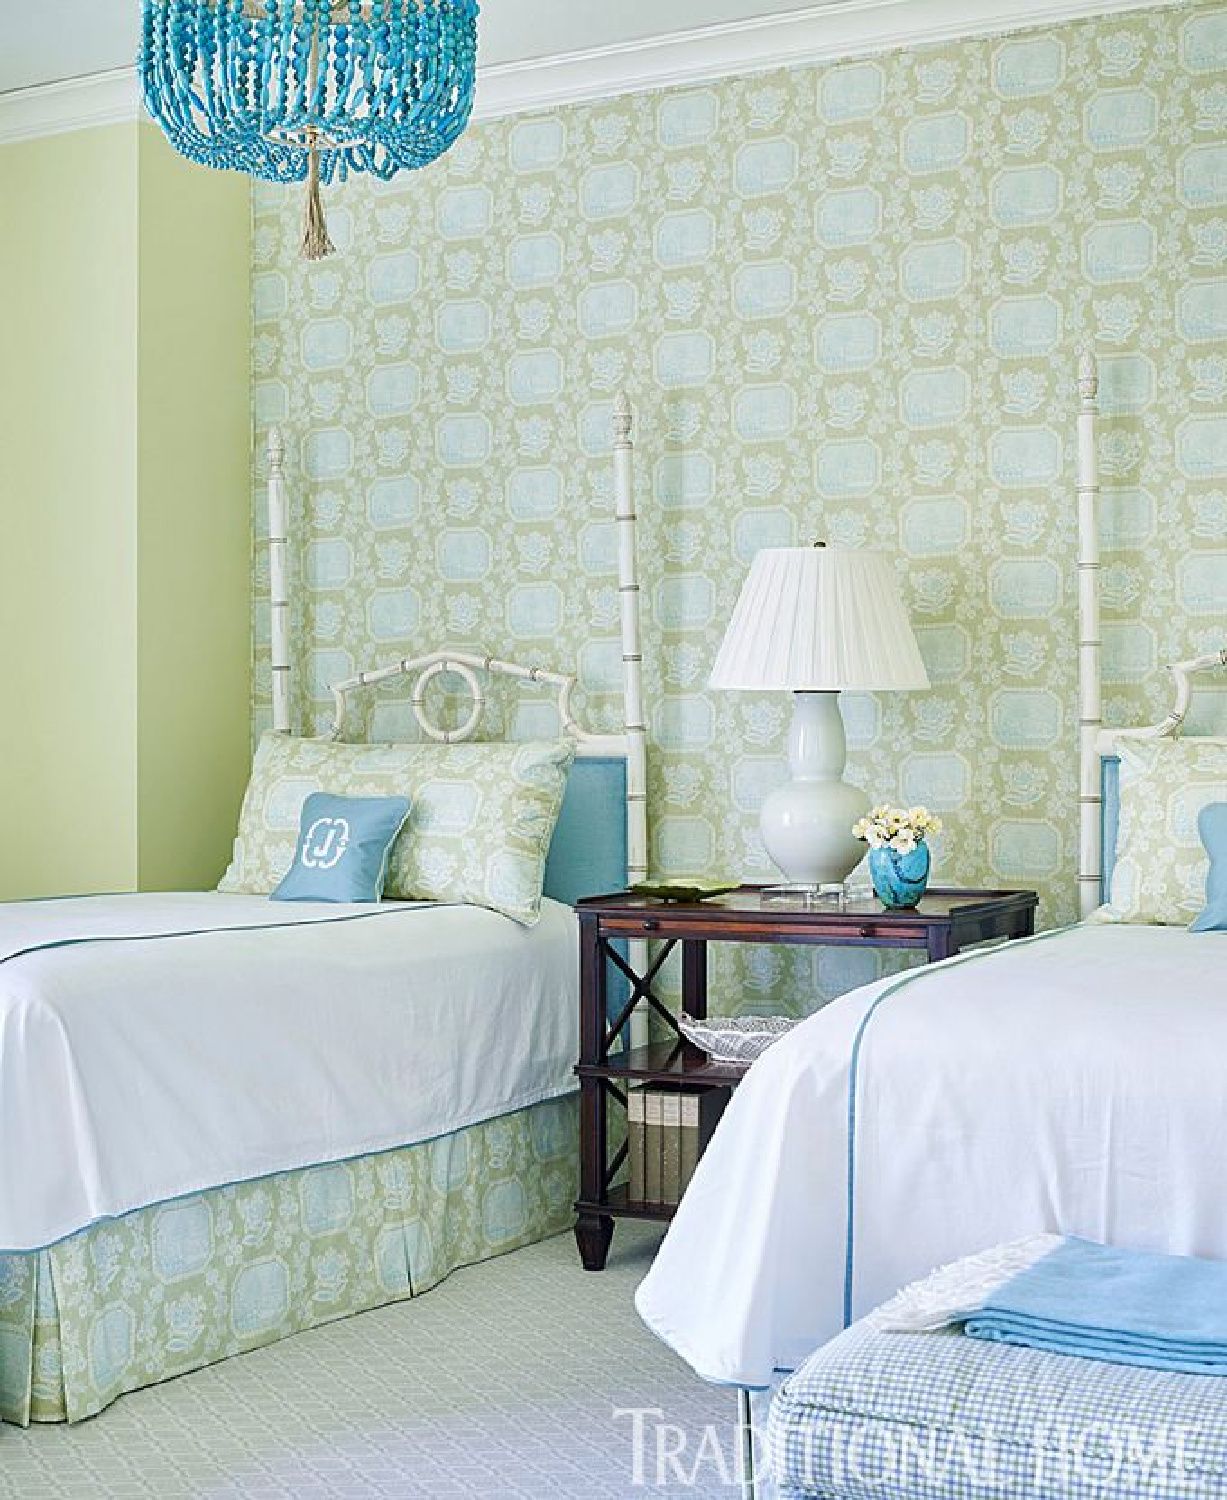 Turquoise accents in a lovely bedroom with twin poster beds - Traditional Home. #coastalbedrooms #turquoise